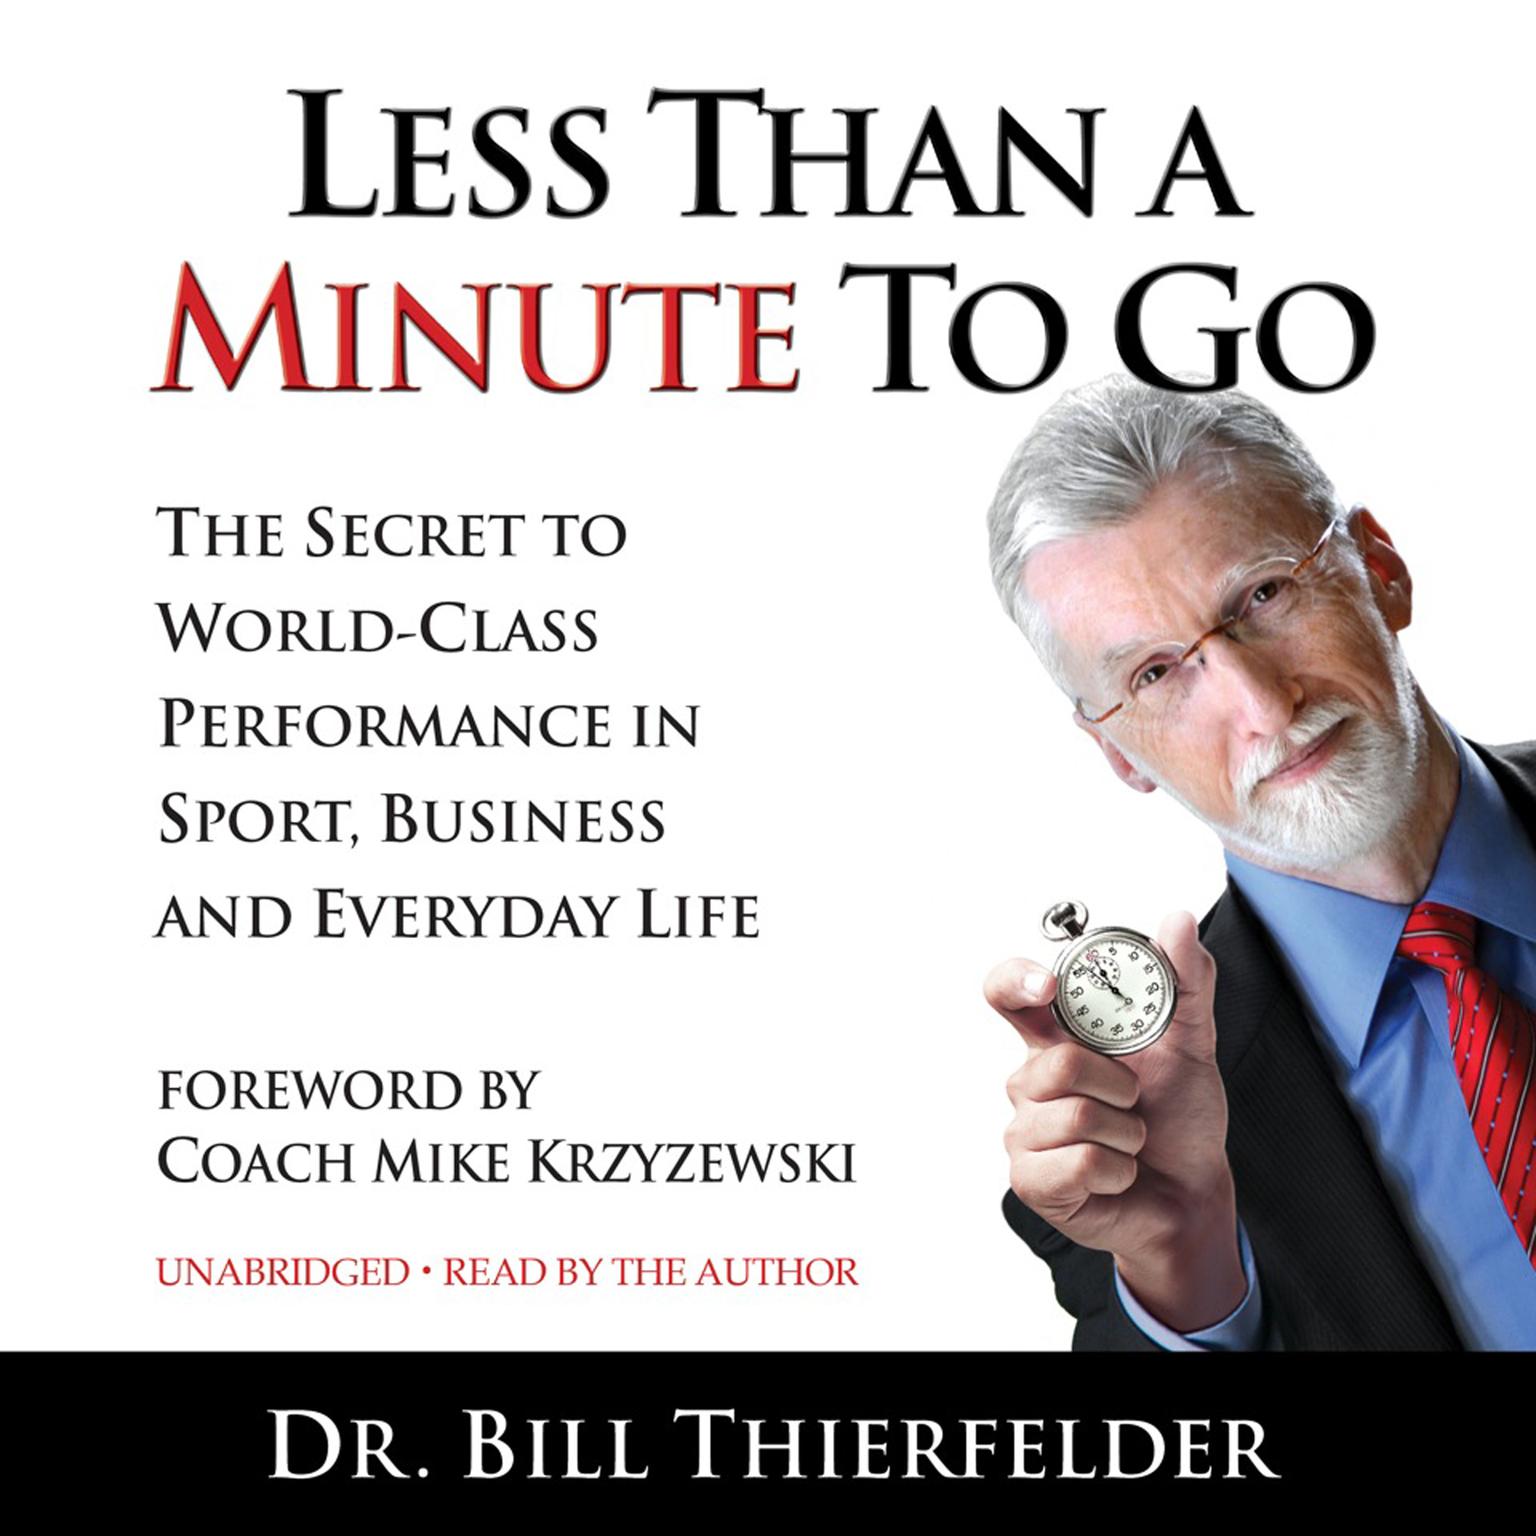 Less Than A Minute To Go: The Secret to World-Class Performance in Sport, Business and Everyday Life Audiobook, by Bill Thierfelder